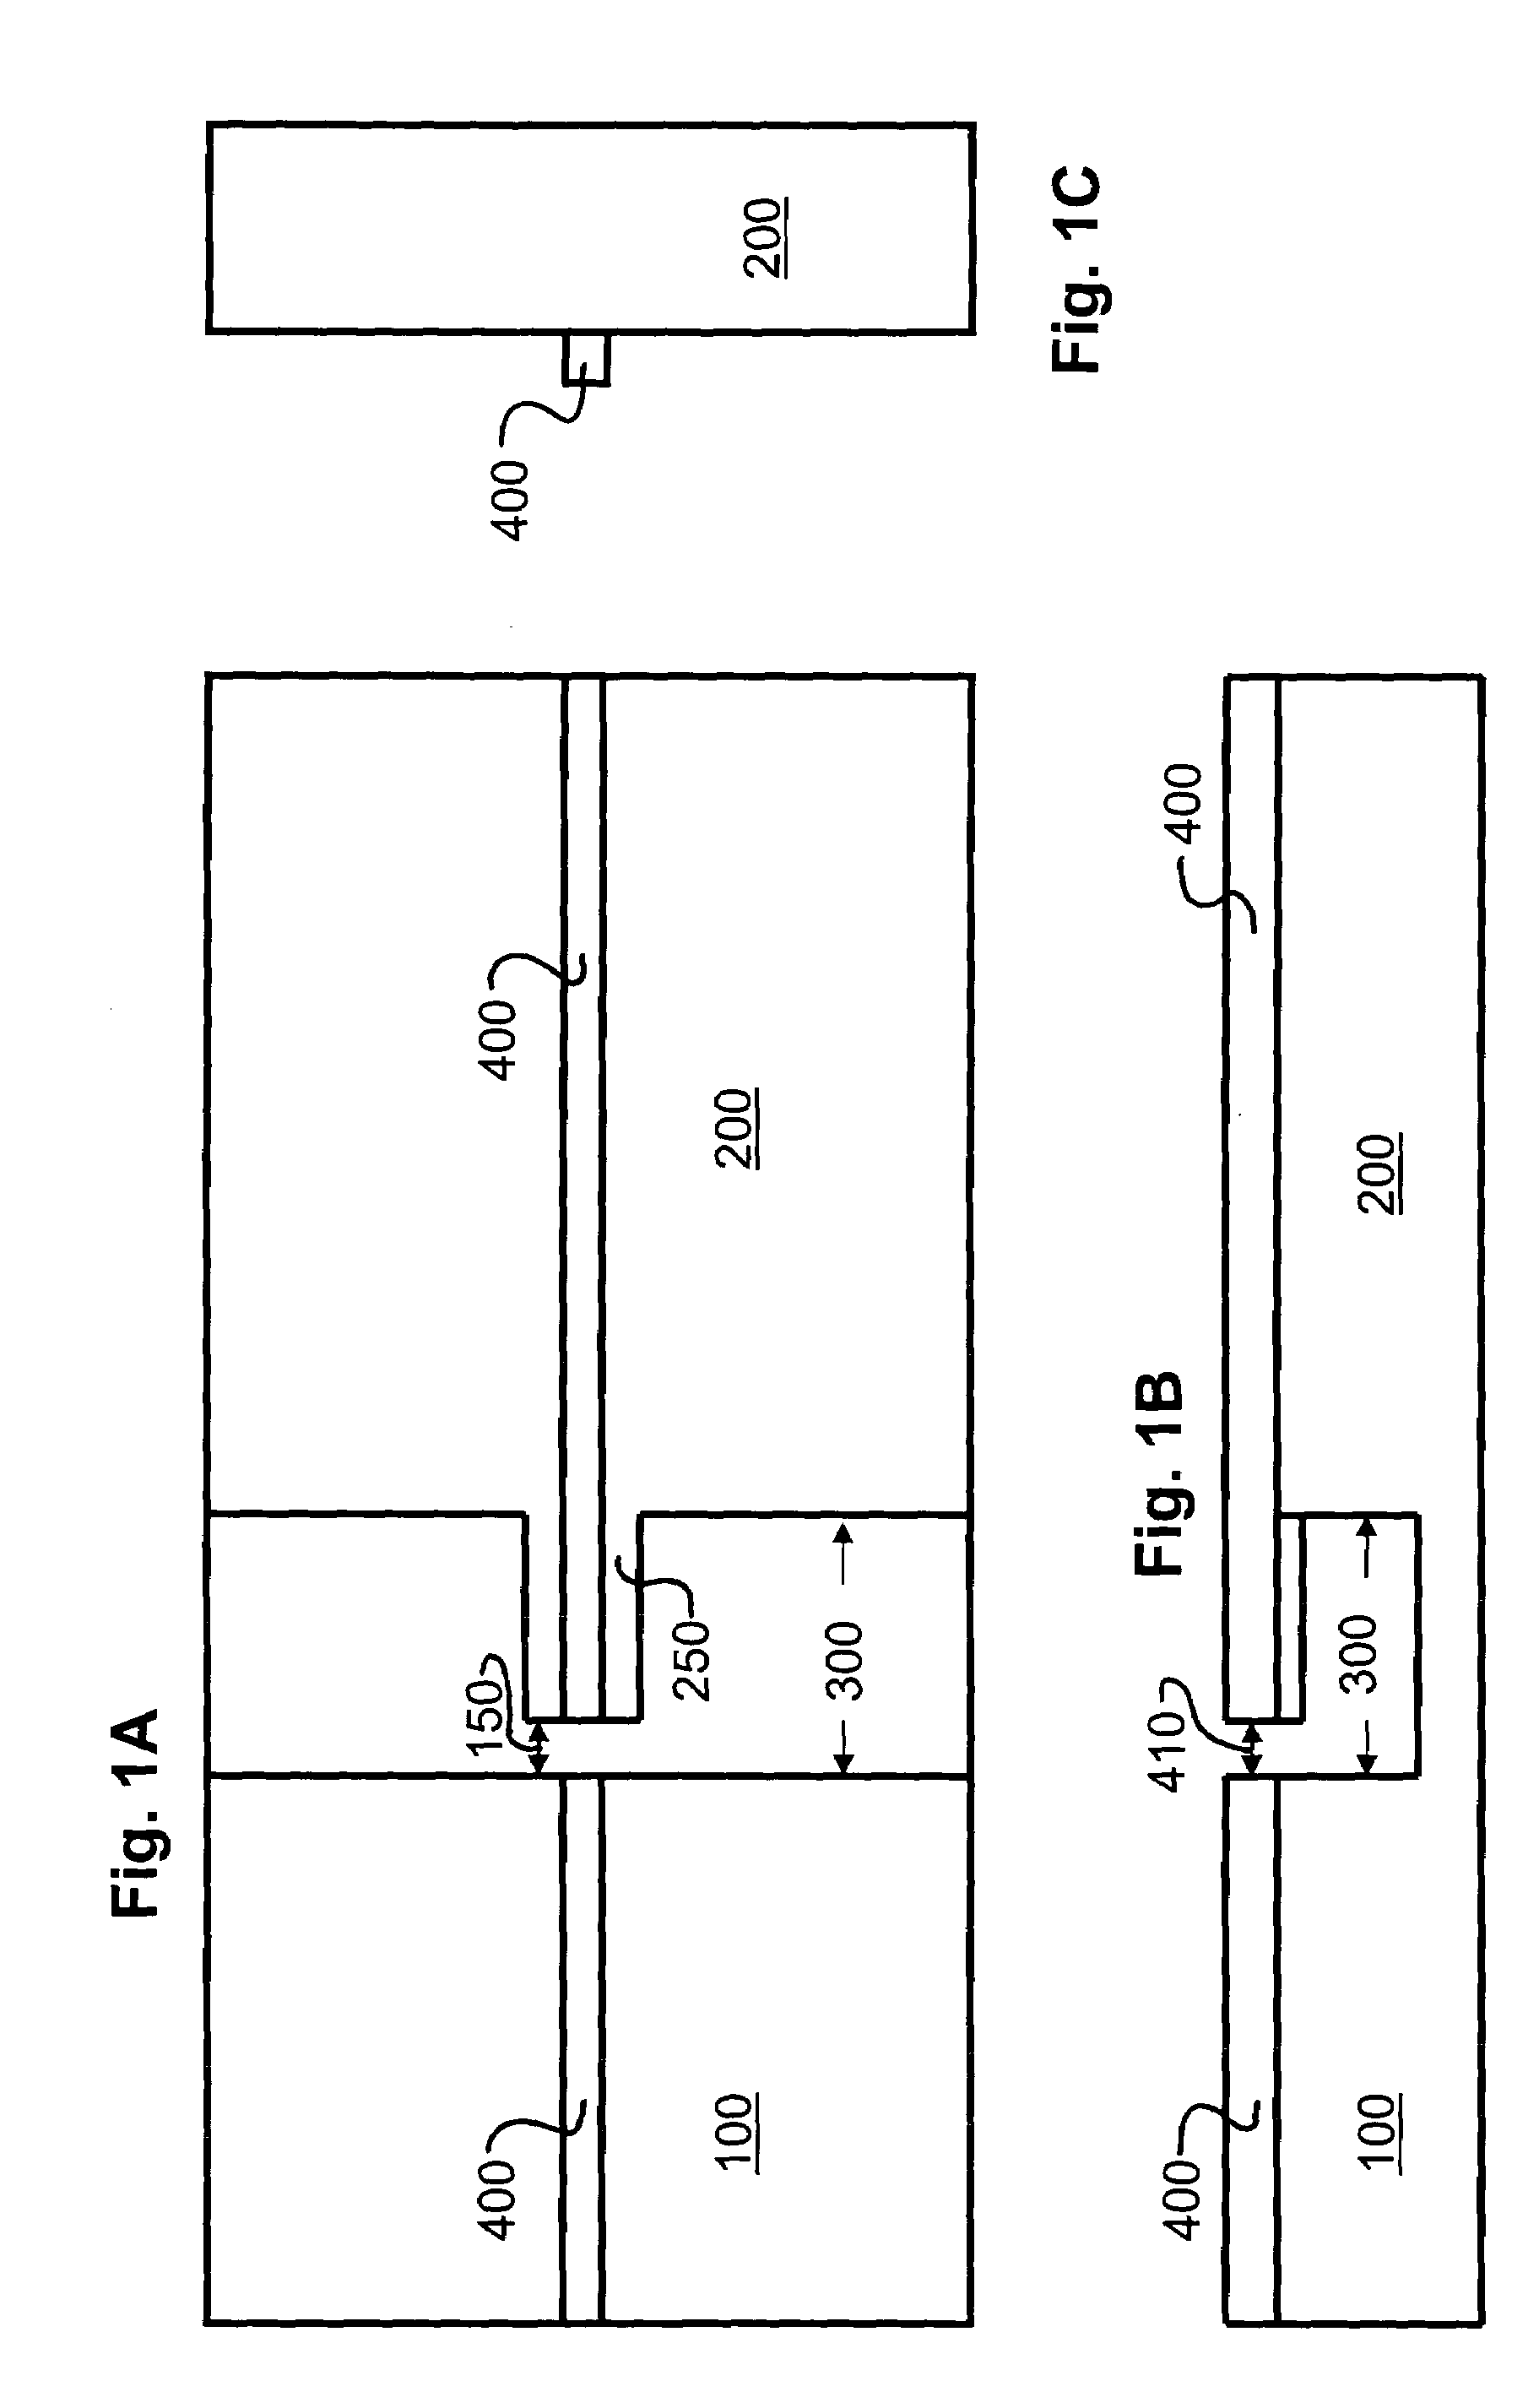 Molecular detection using an optical waveguide fixed to a cantilever